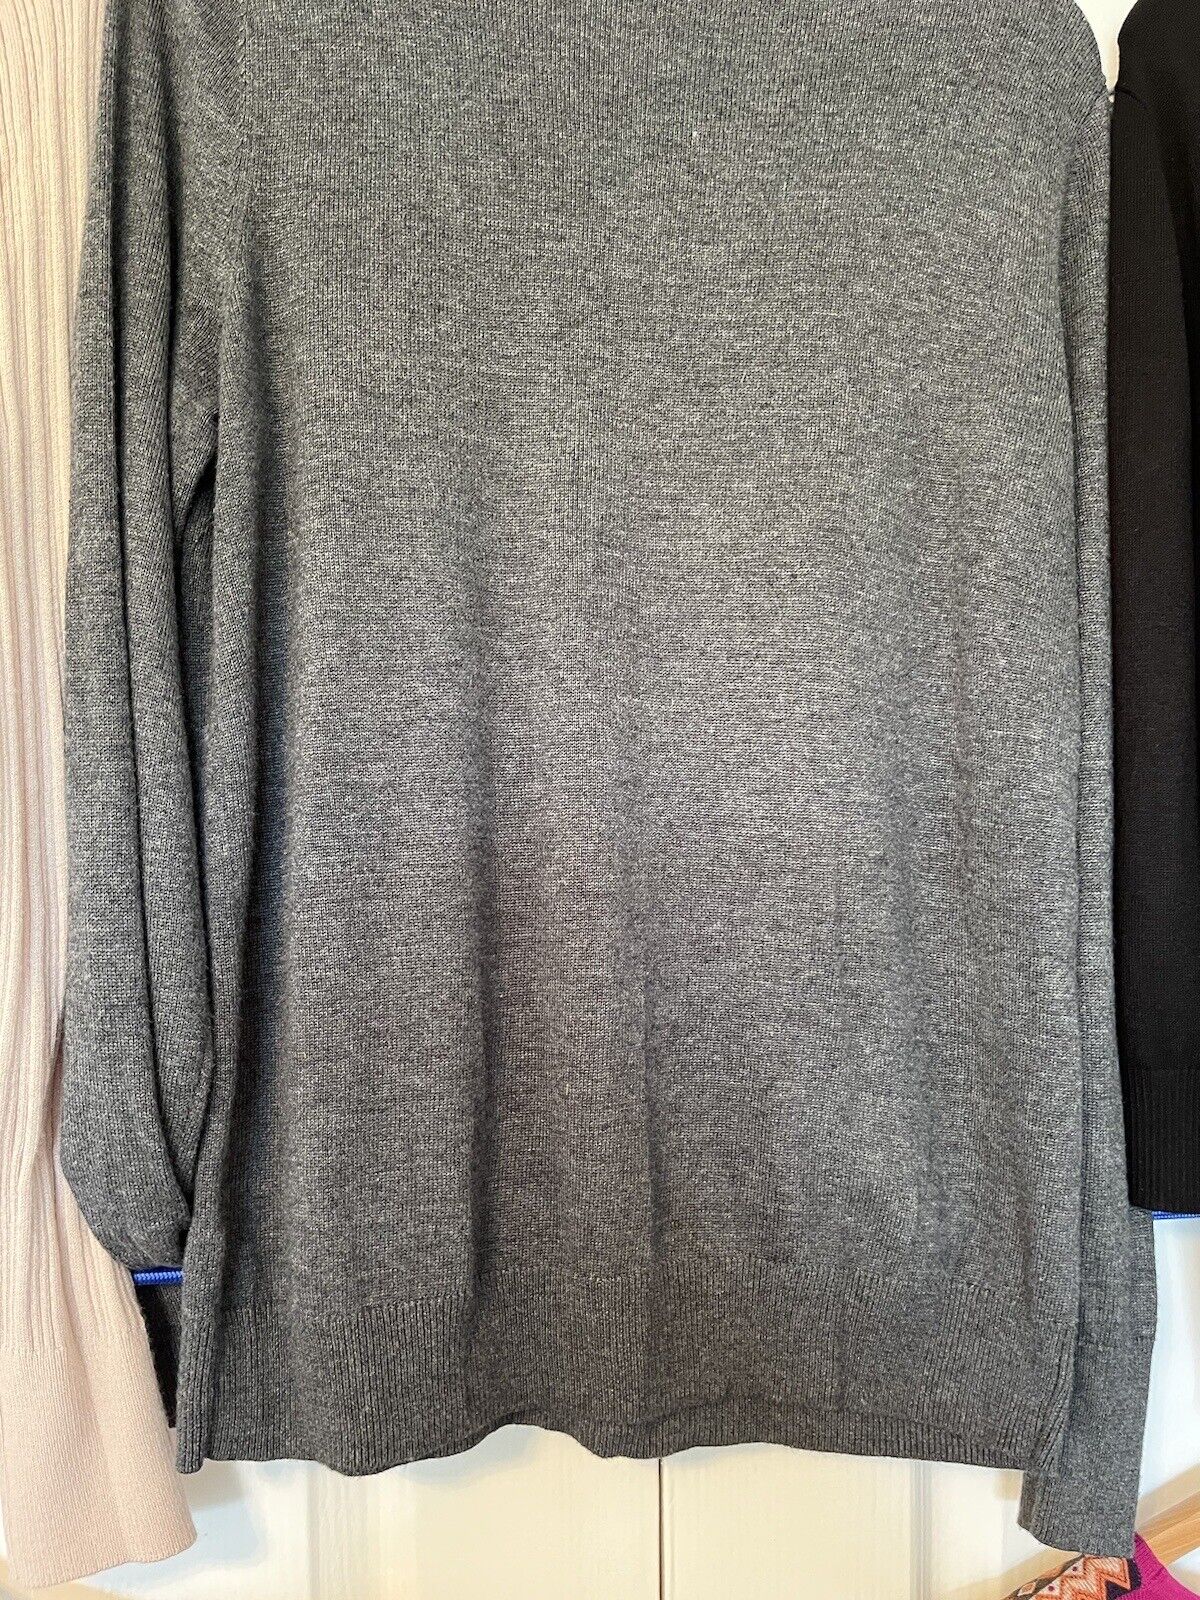 Primark and TK Maxx 5 Jumpers - Size Large 14/16 | eBay